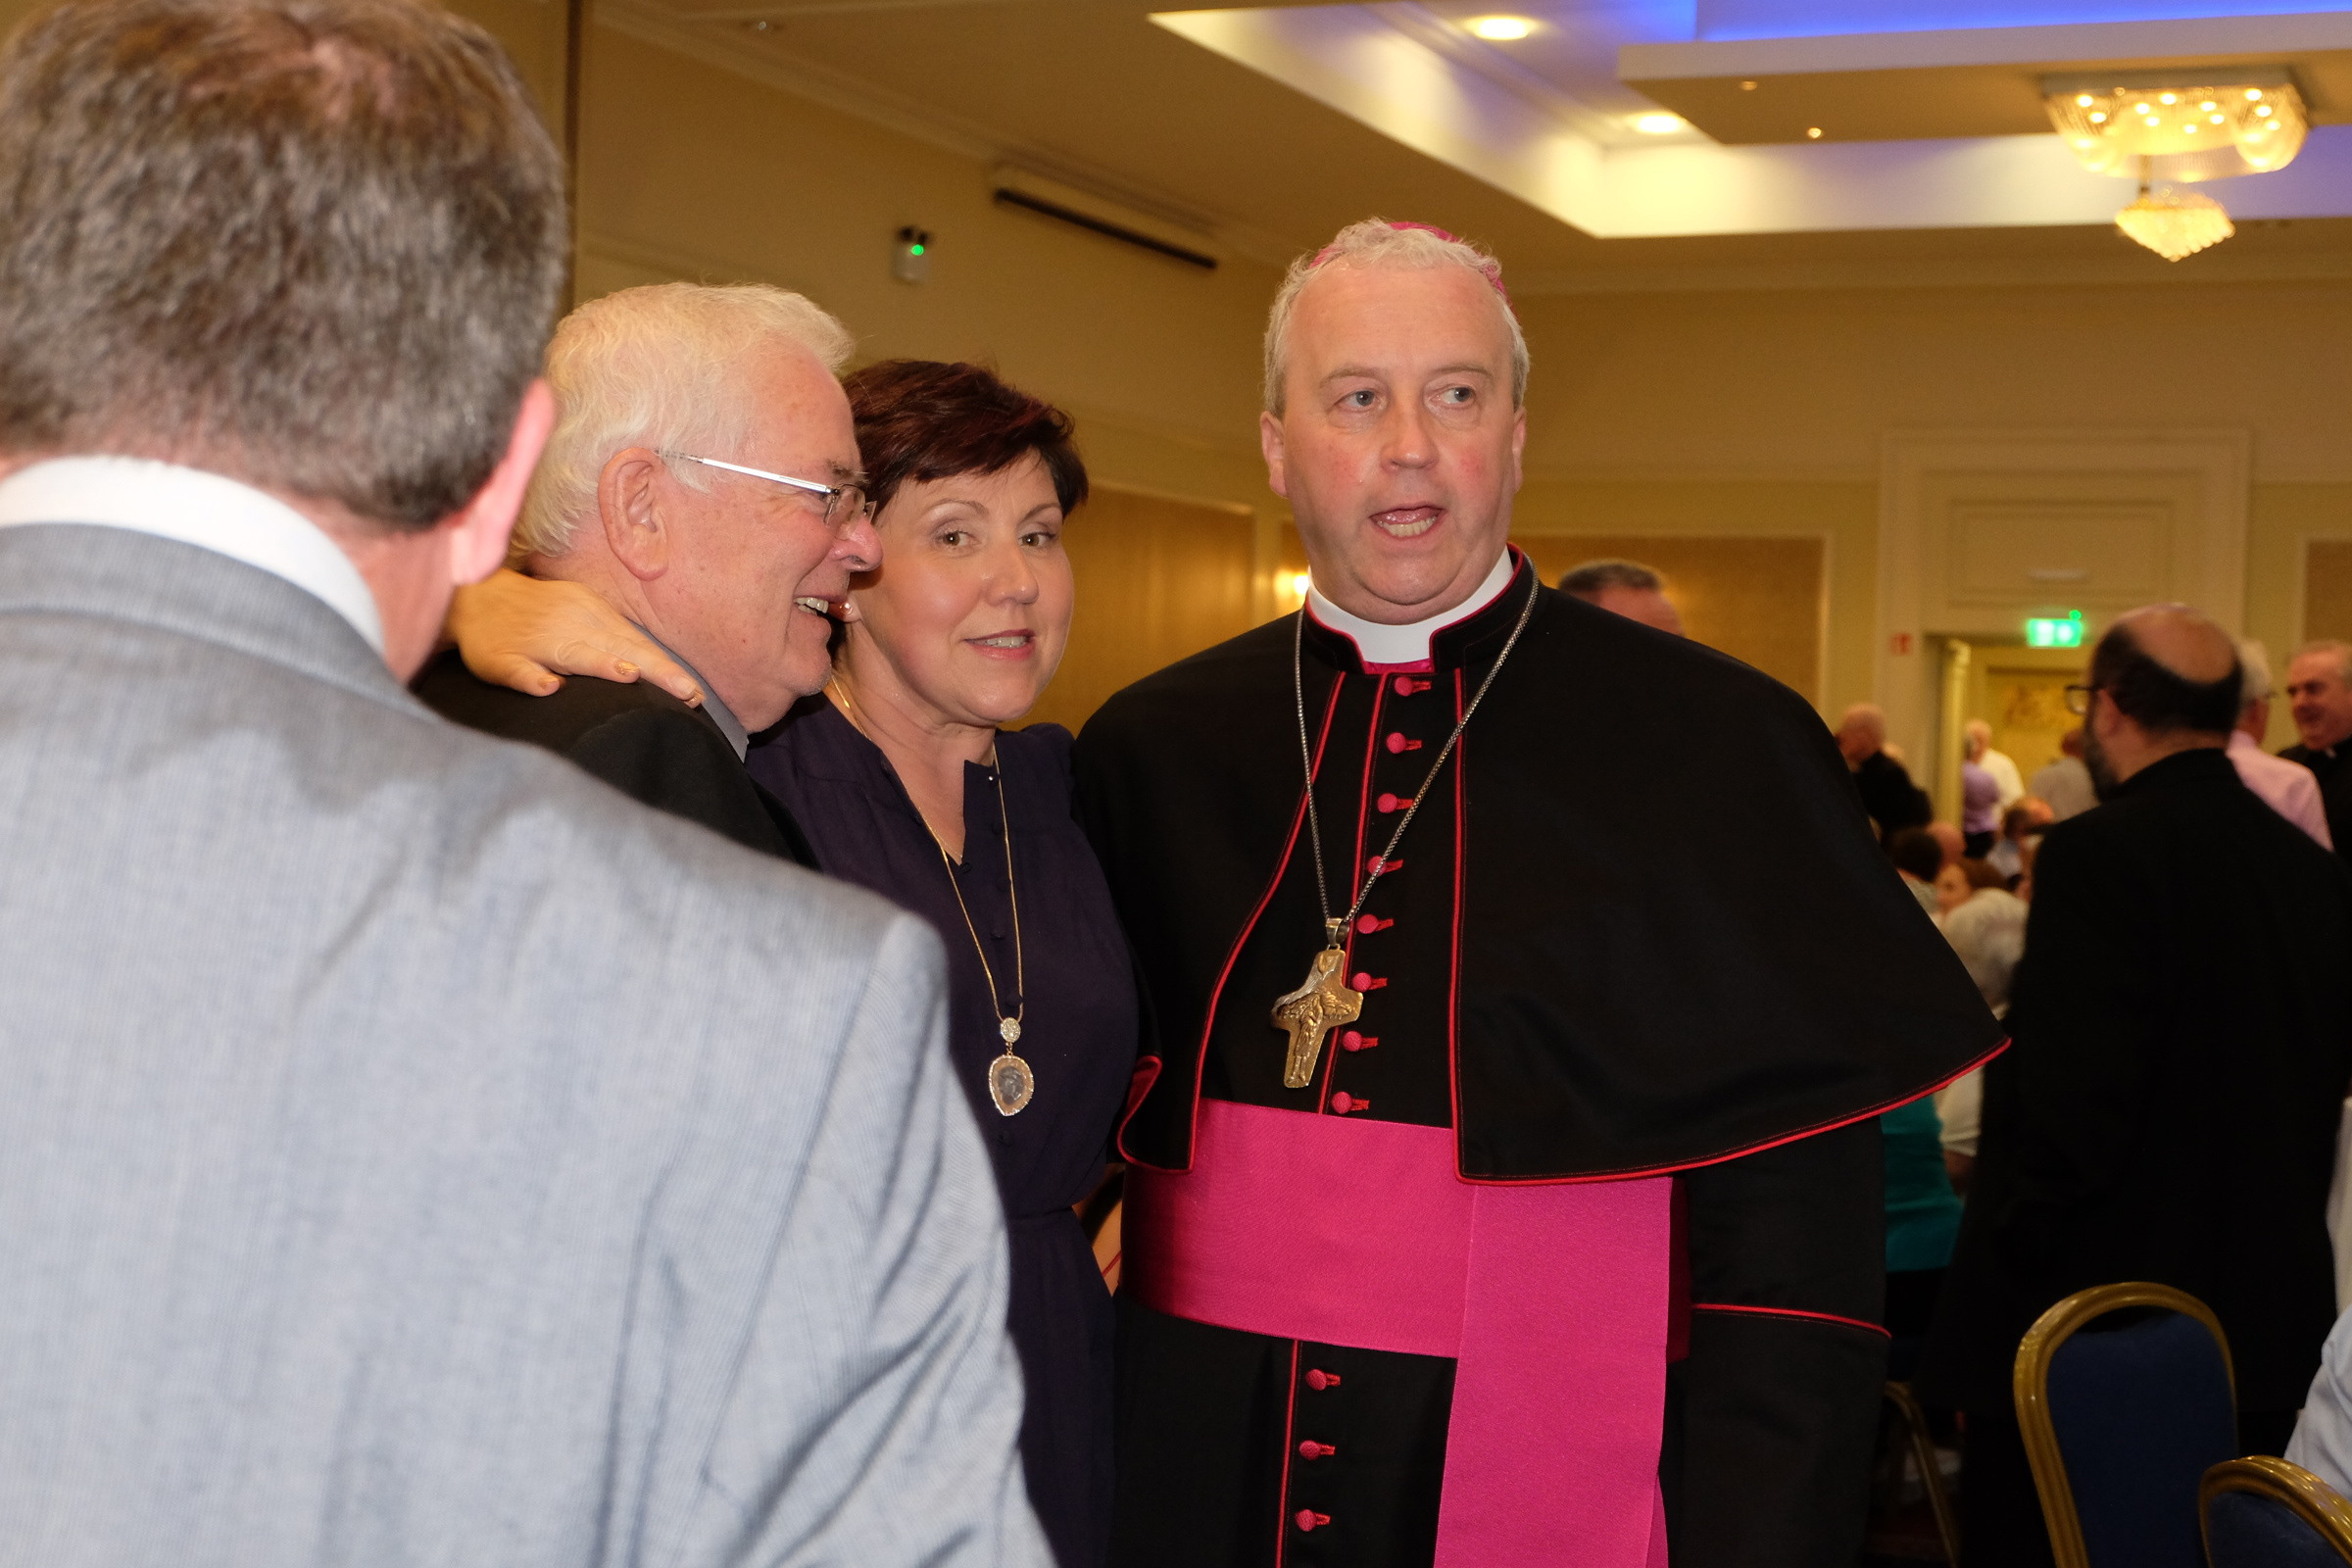 with the new Bishop Michael Router at a celebration dinner following the Bishop's Ordination Armagh City Hotel, Armagh,  21 July 2019Credit: LiamMcArdle.com